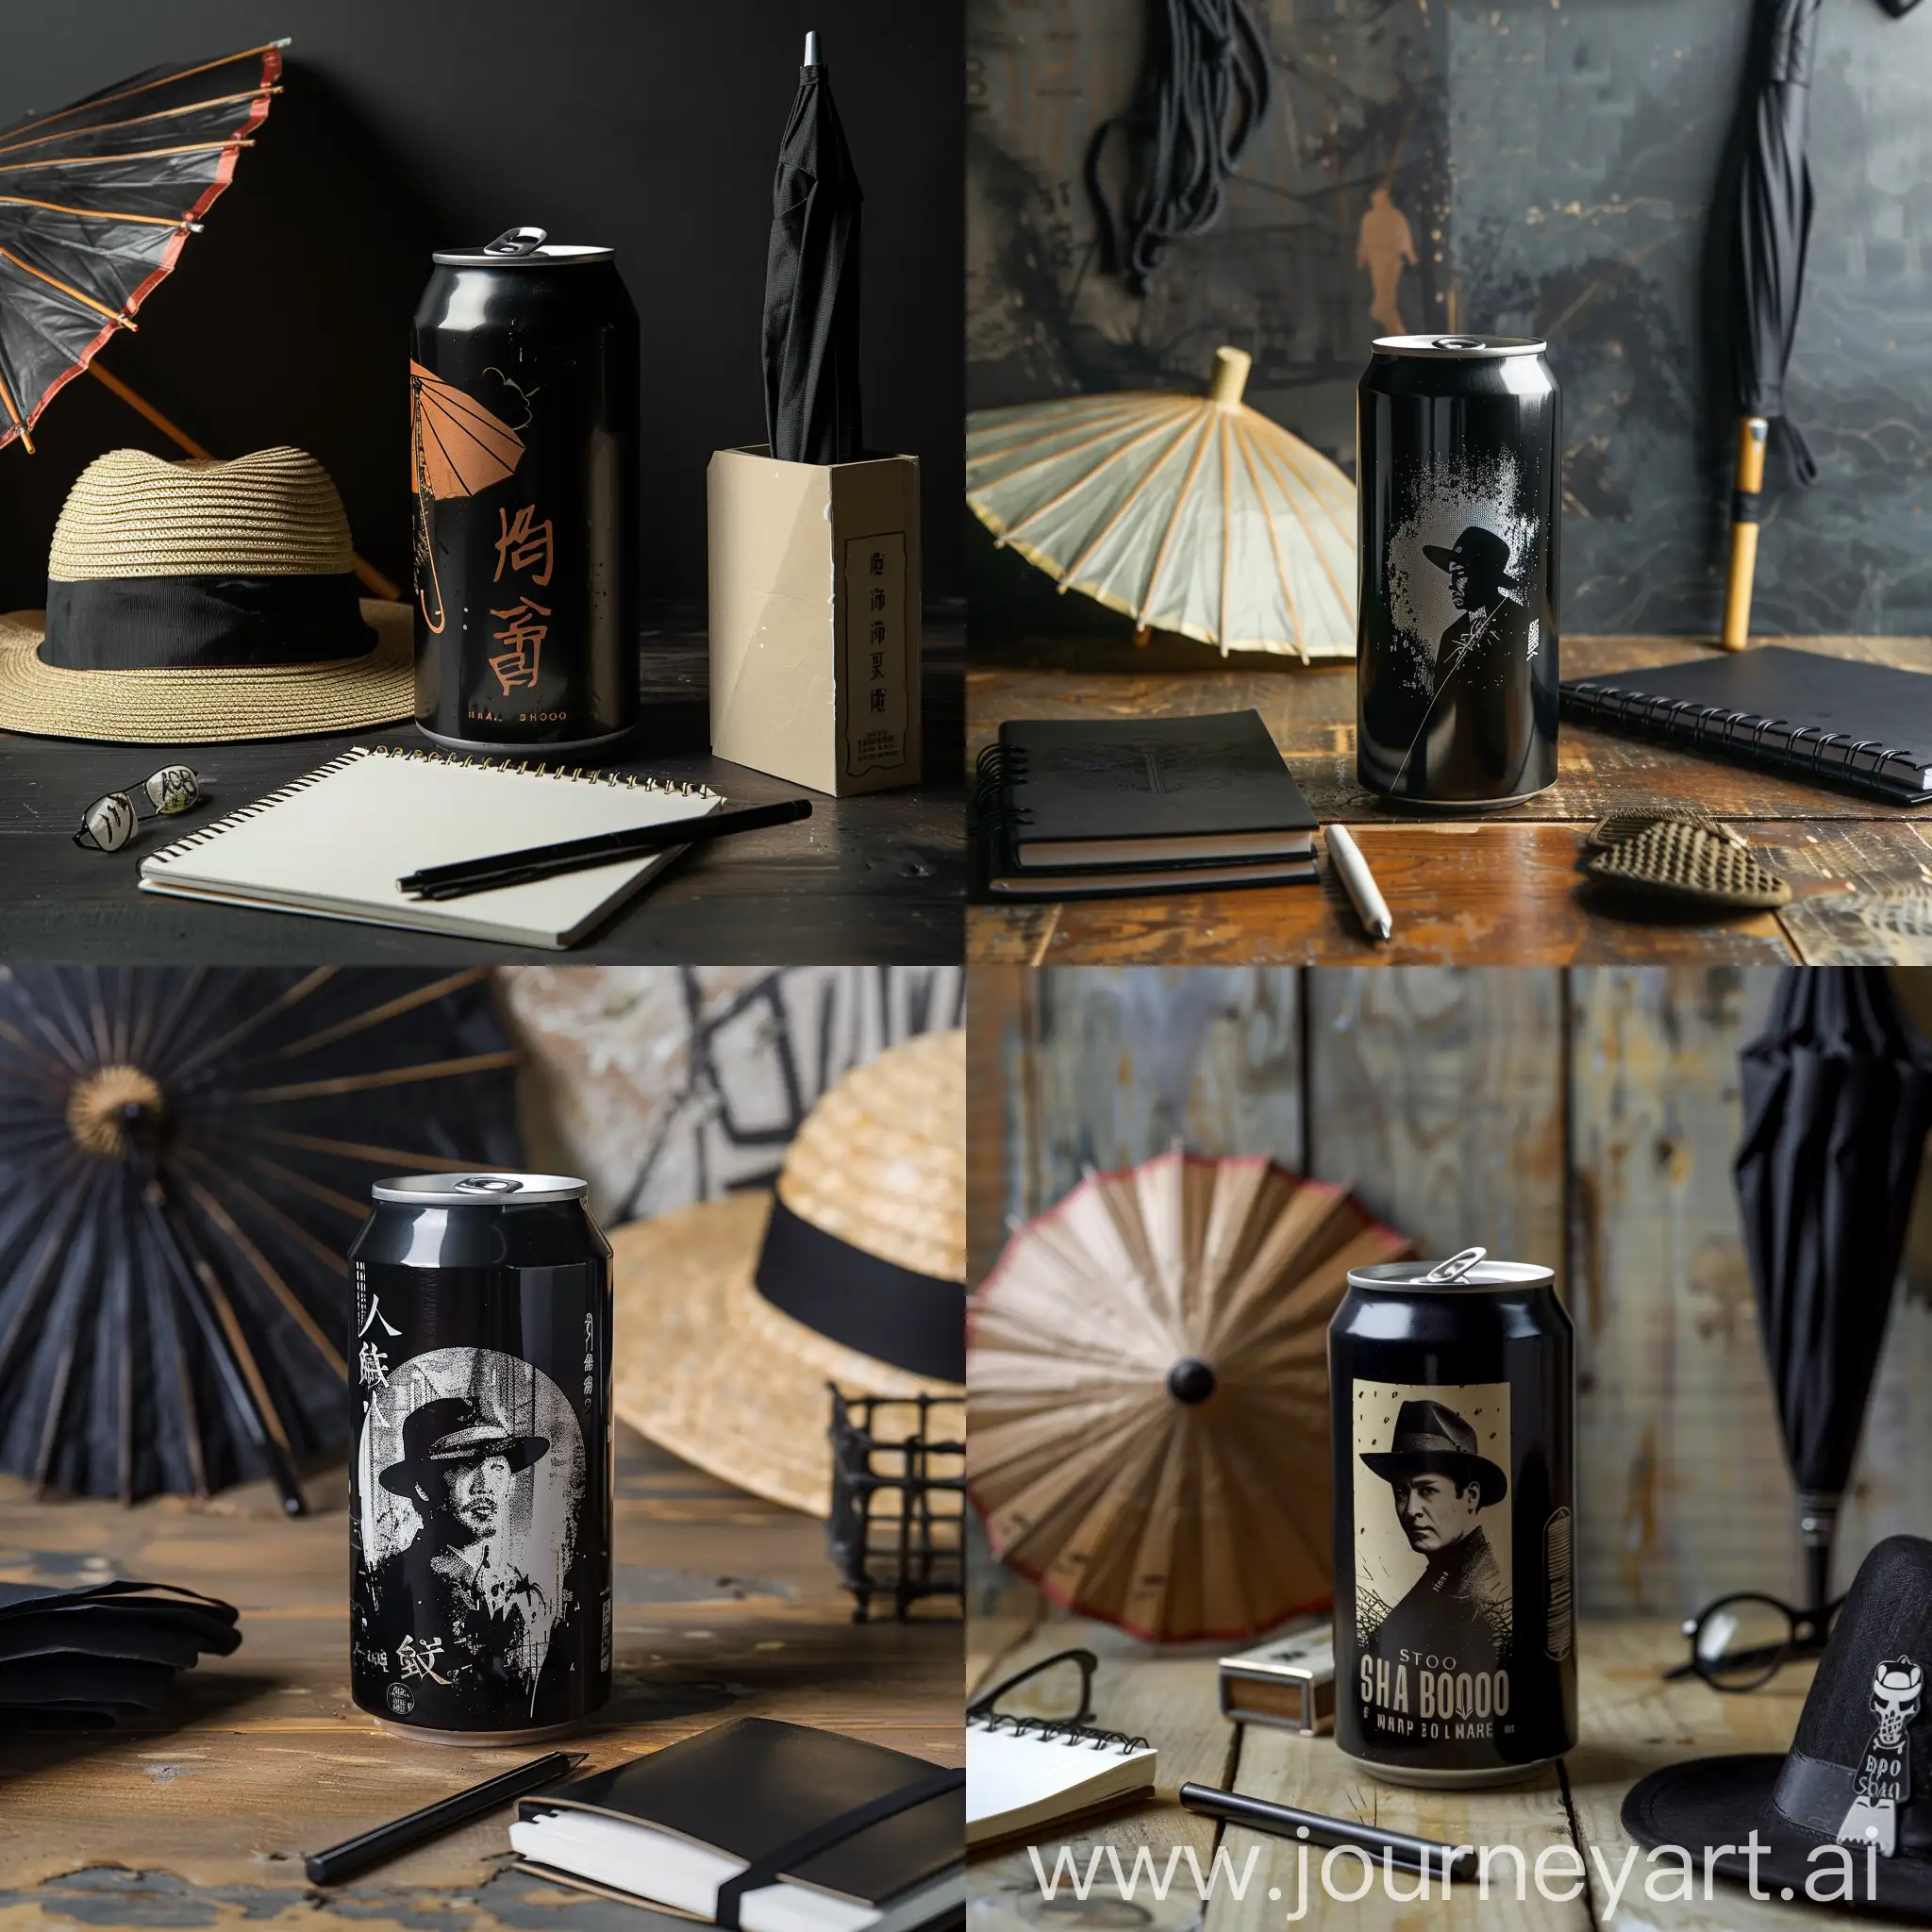 Vintage-Noir-Scene-Black-Soda-Can-with-Notebook-Umbrella-and-Fedora-Hat